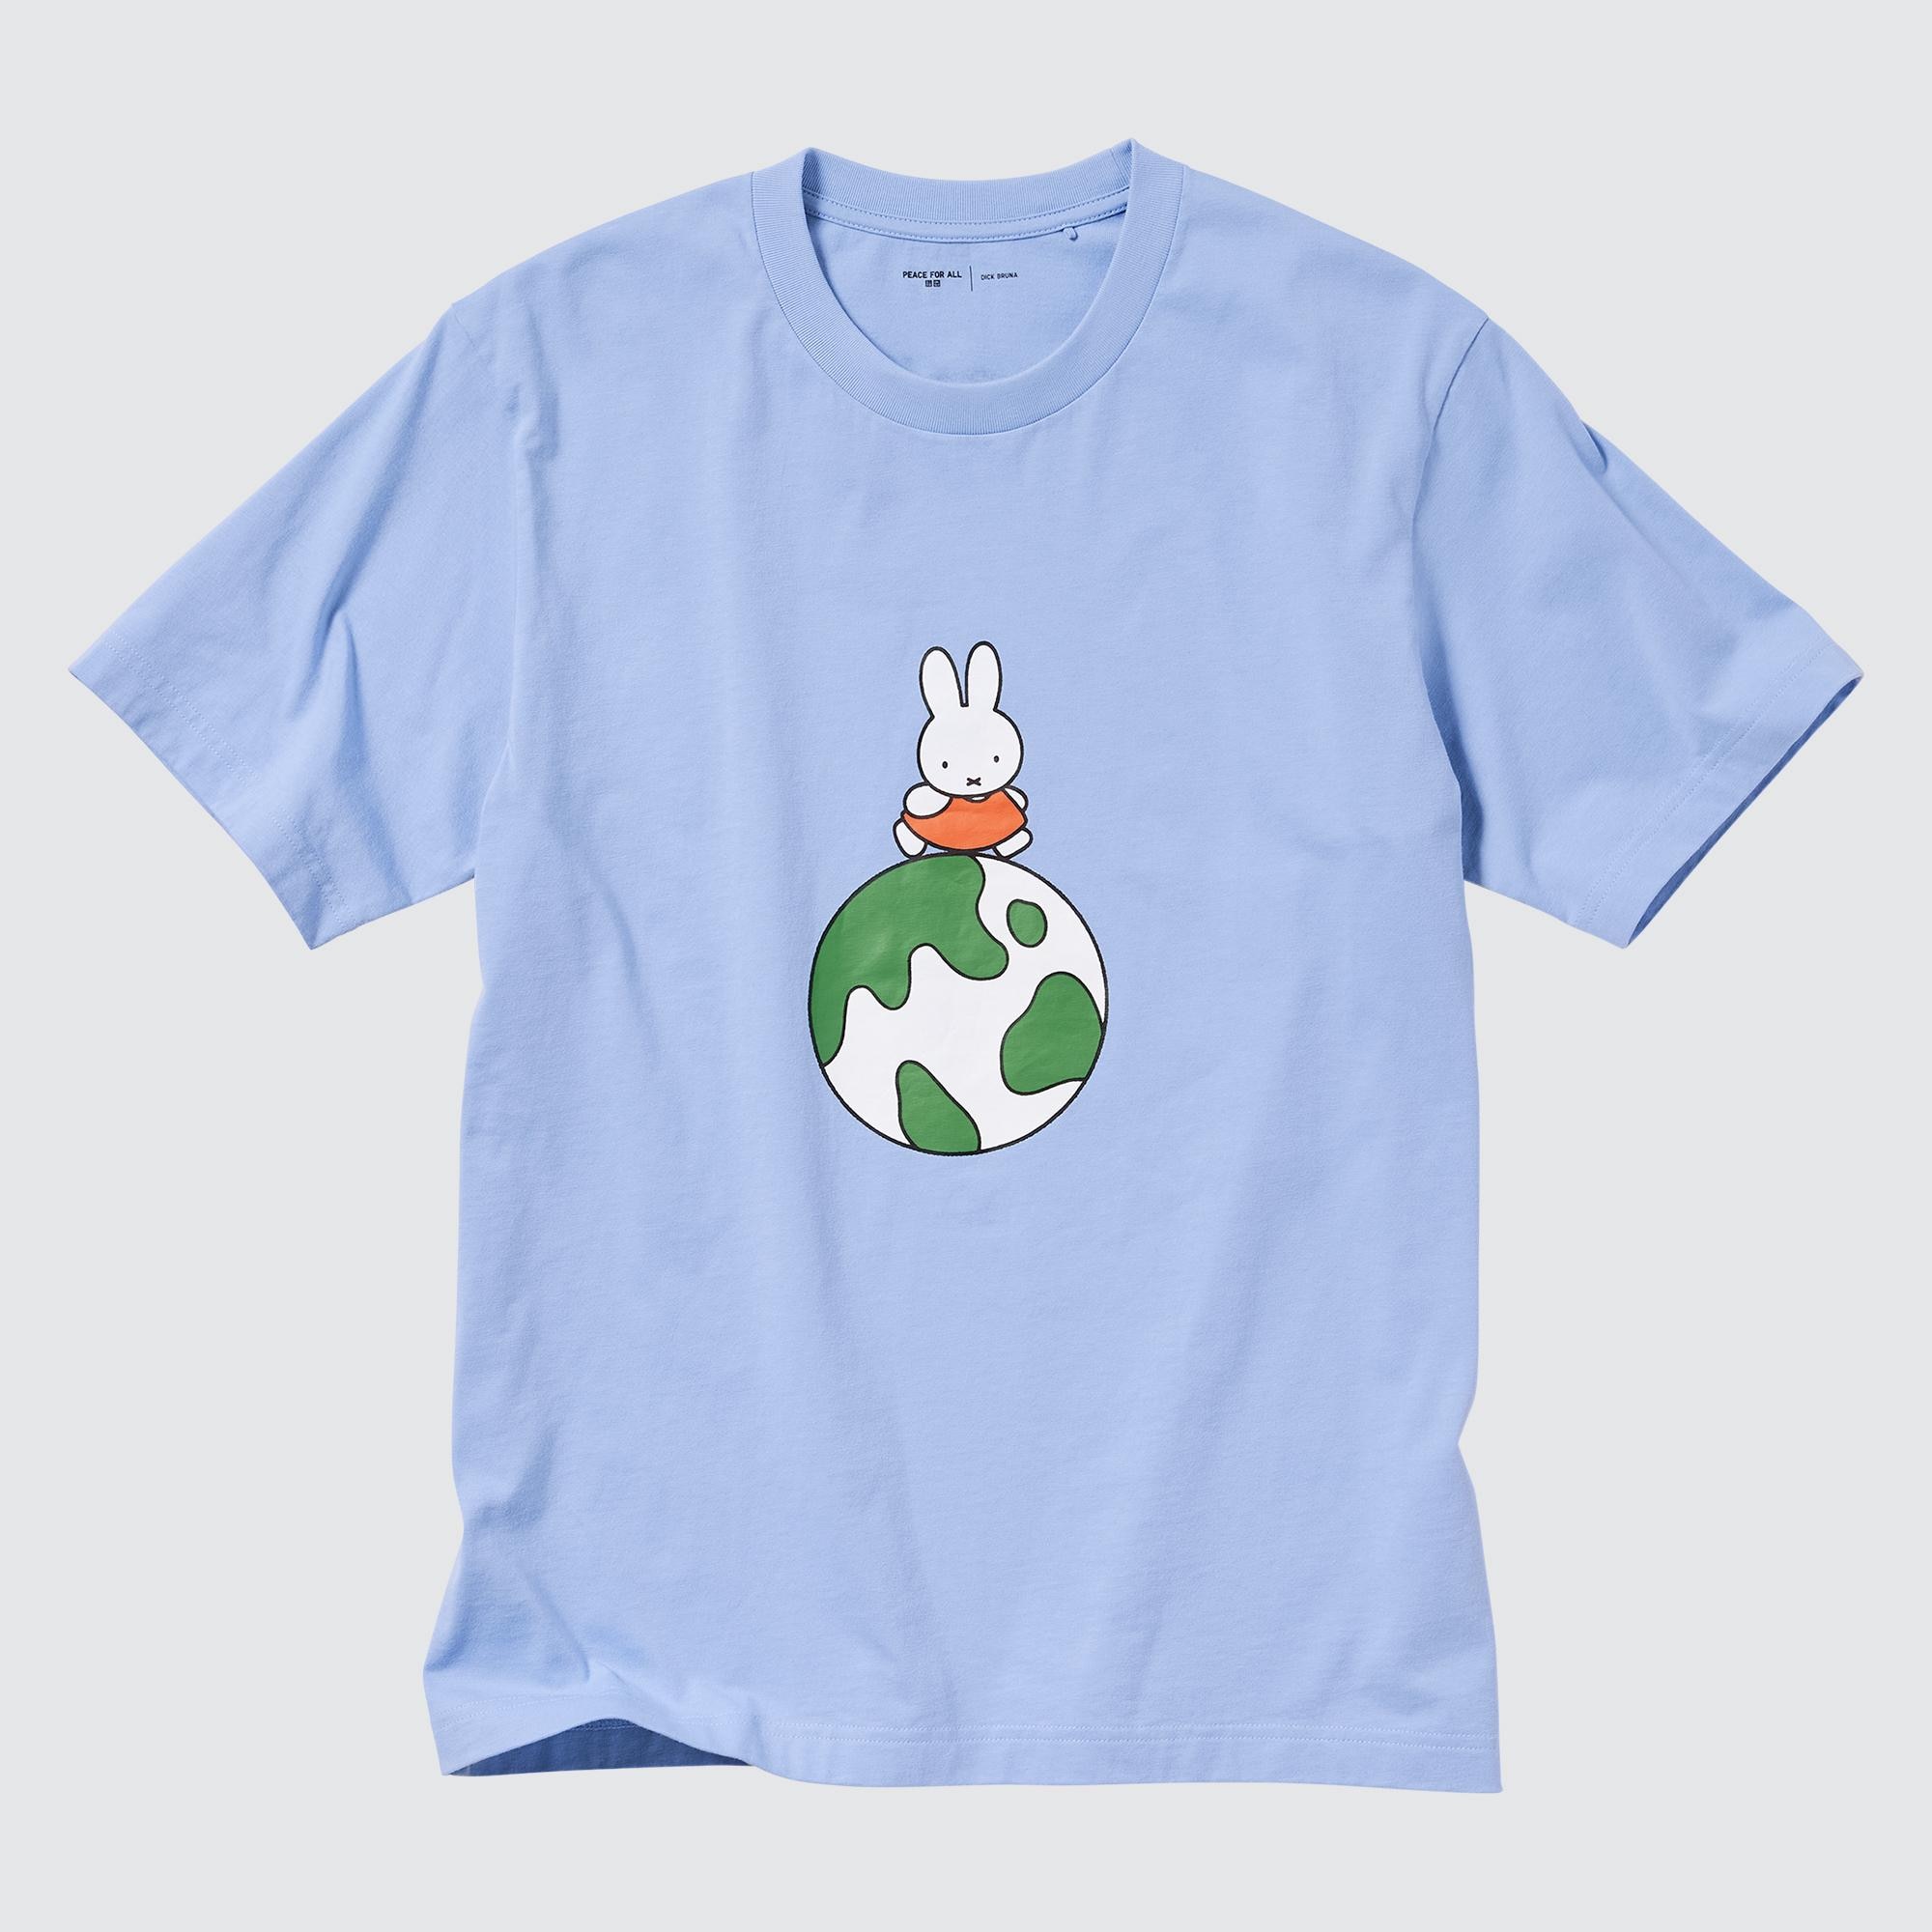 UNIQLO PEACE FOR ALL  Introducing a charity T-shirt project for